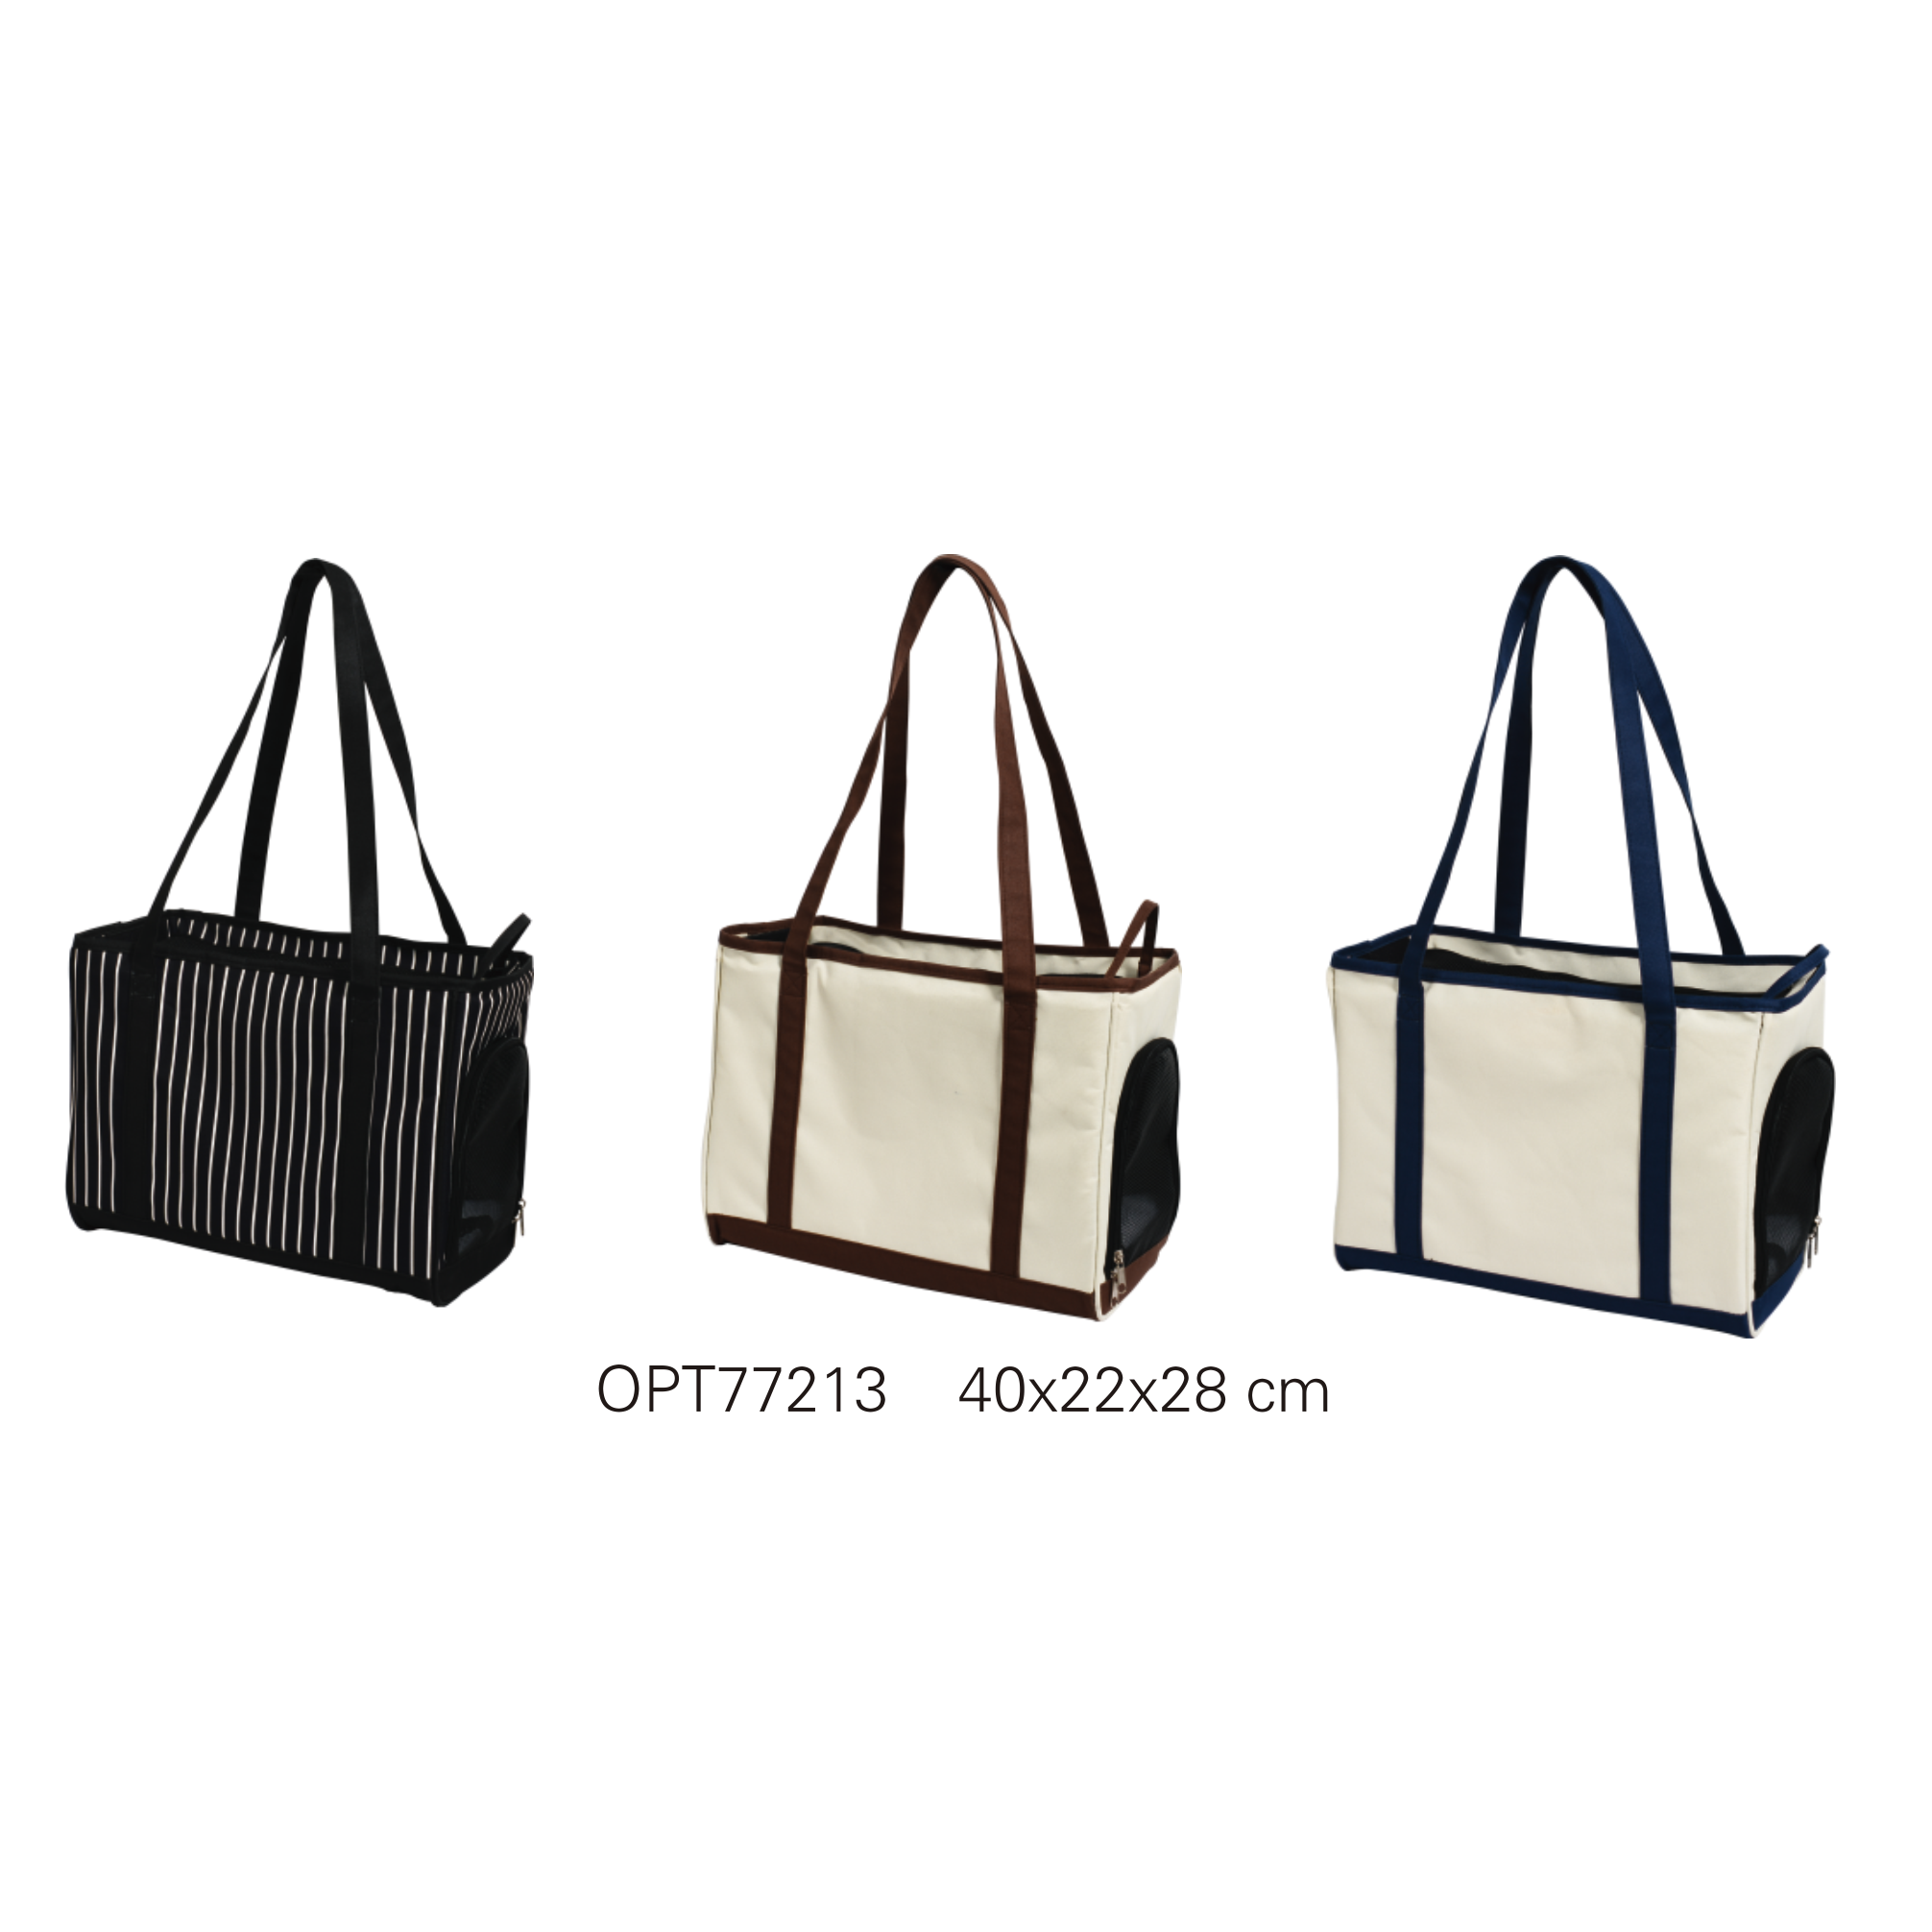 OPT77213 Pet bags & carriers